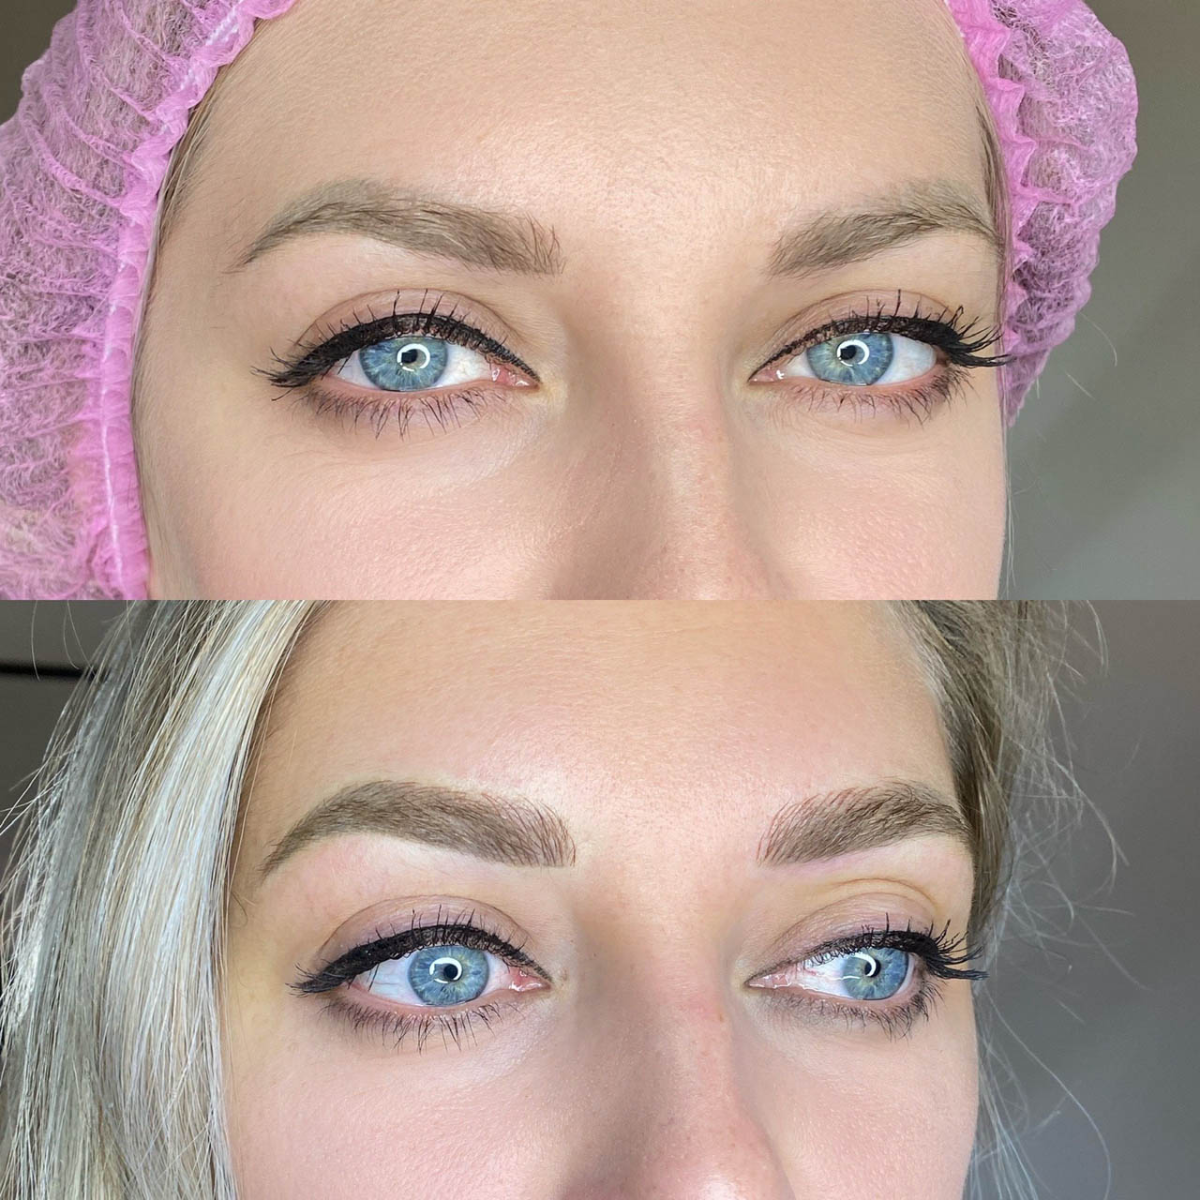 microblading treatment before and after results